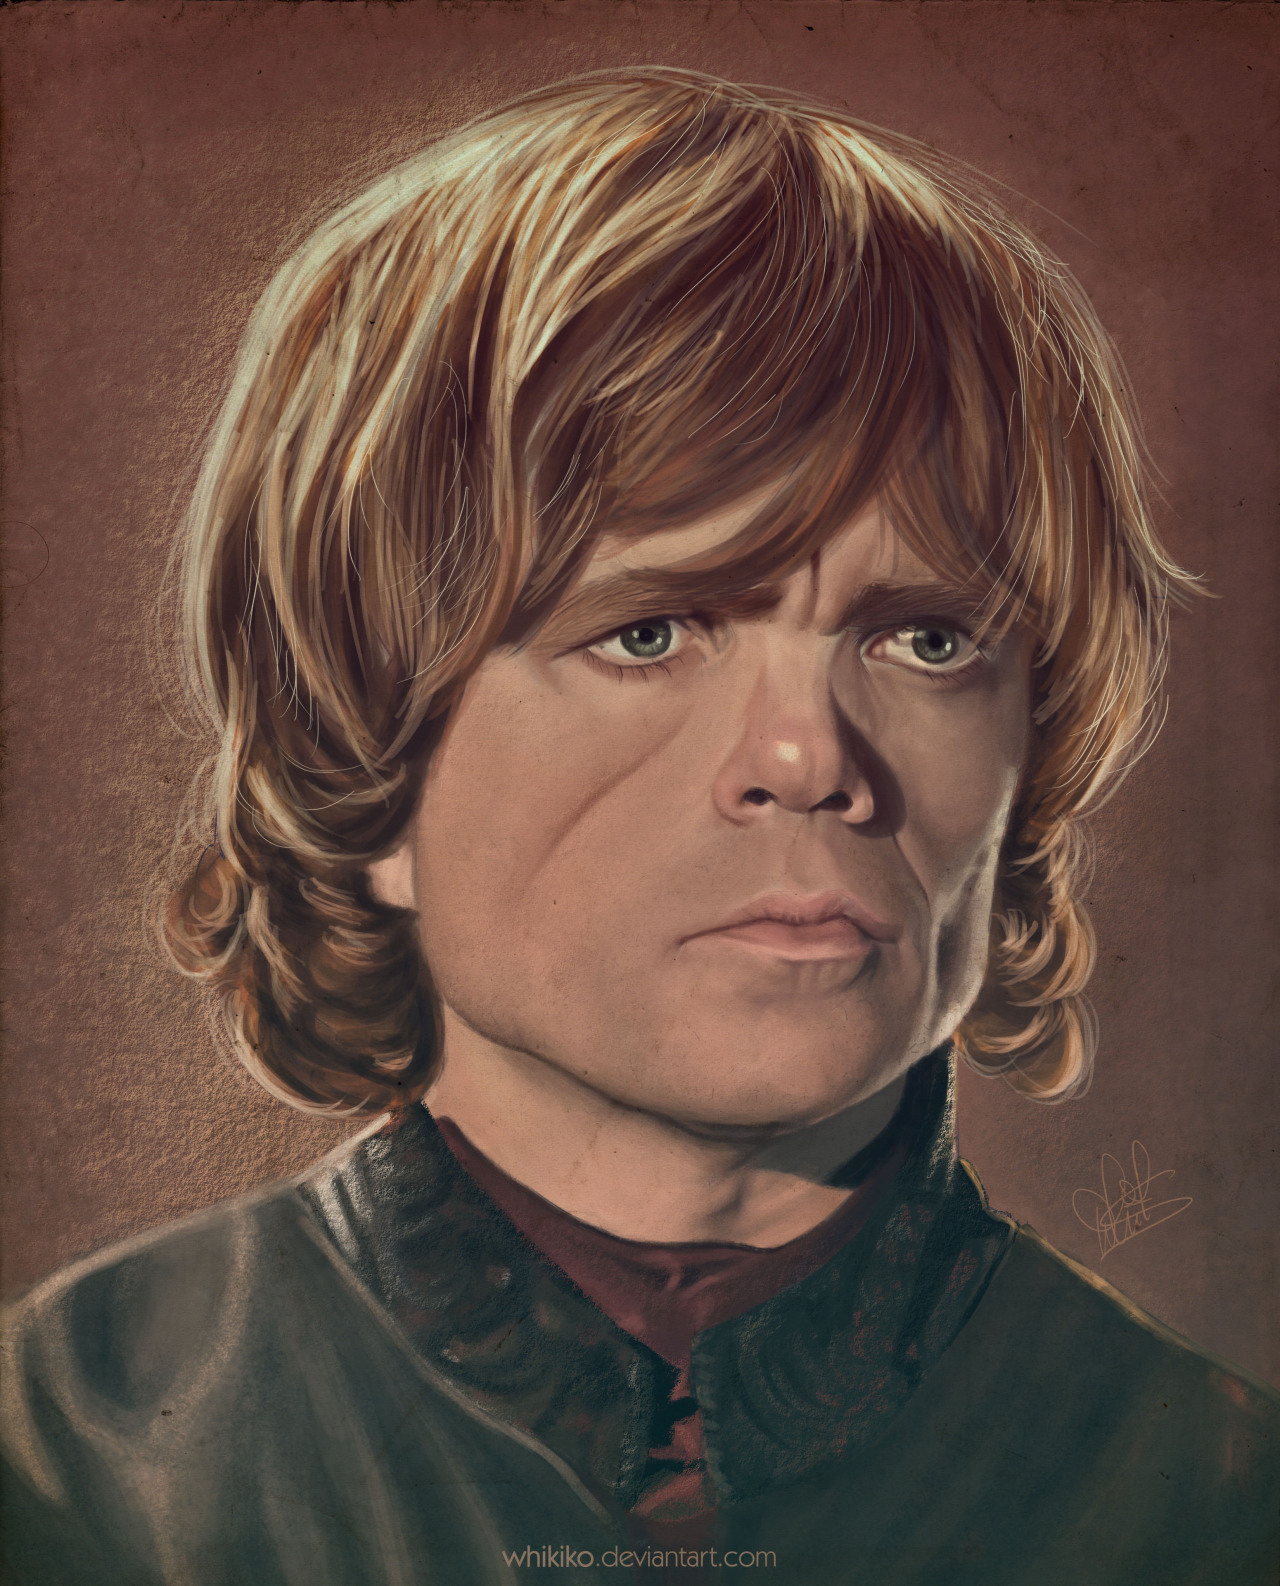 “I’m guilty of a far more monstrous crime. I’m guilty of being a dwarf. Oh yes I am. I’ve been on trial for that my entire life. I did not do it. I did not kill Joffrey but I wish that I had. Watching your vicious bastard die gave me more relief than...